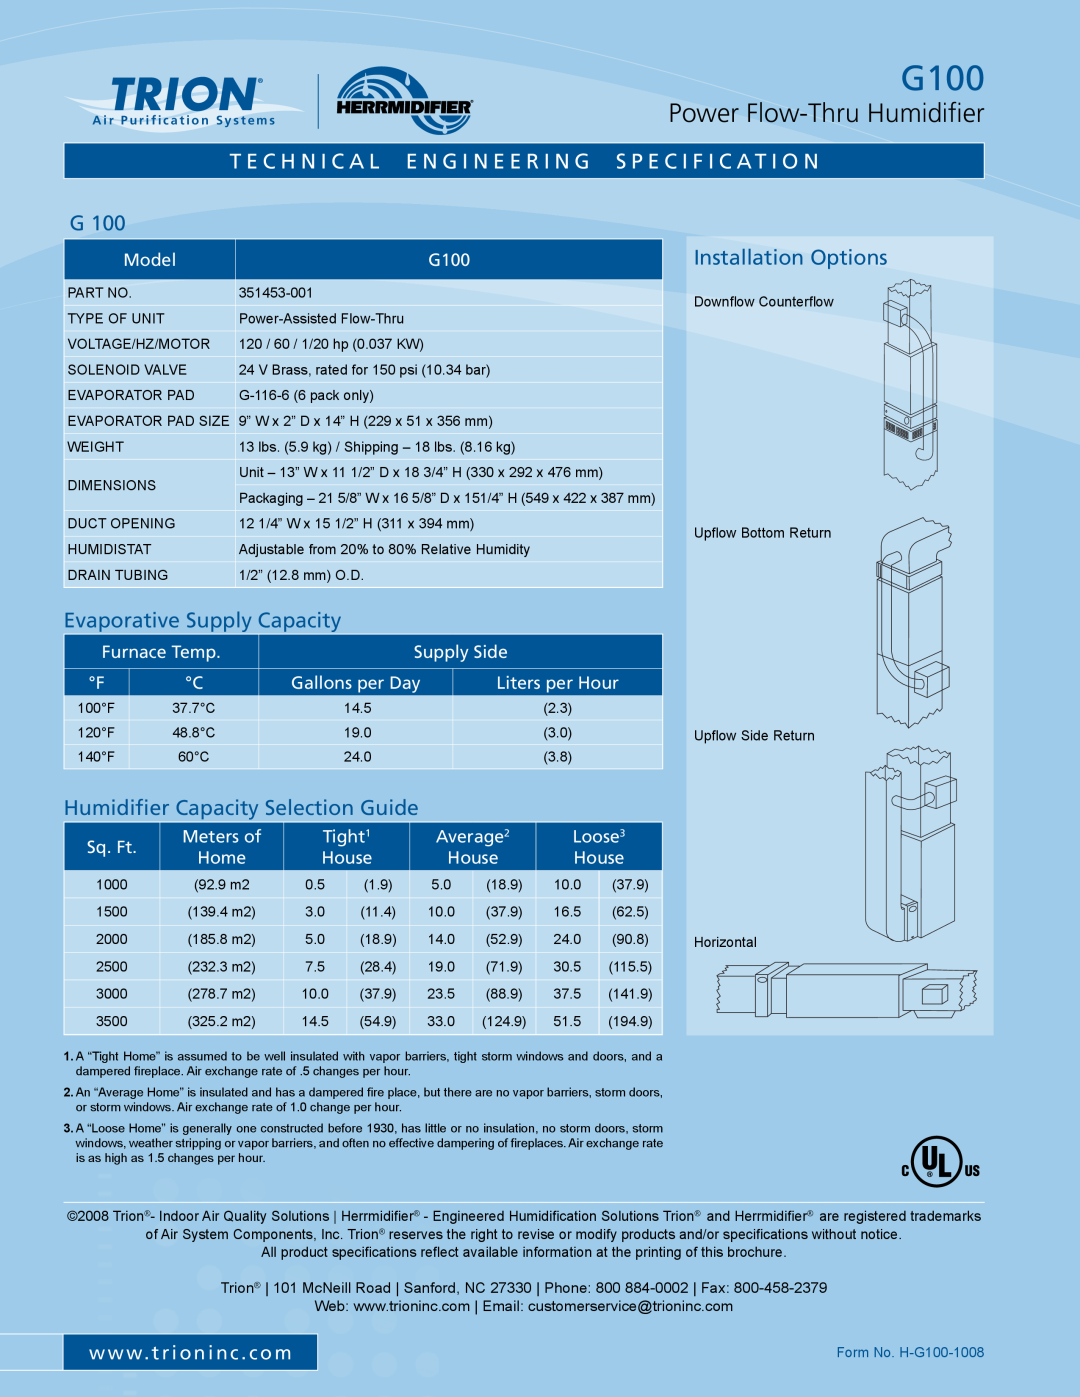 Trion G100 warranty Evaporative Supply Capacity, Humidifier Capacity Selection Guide, Installation Options 